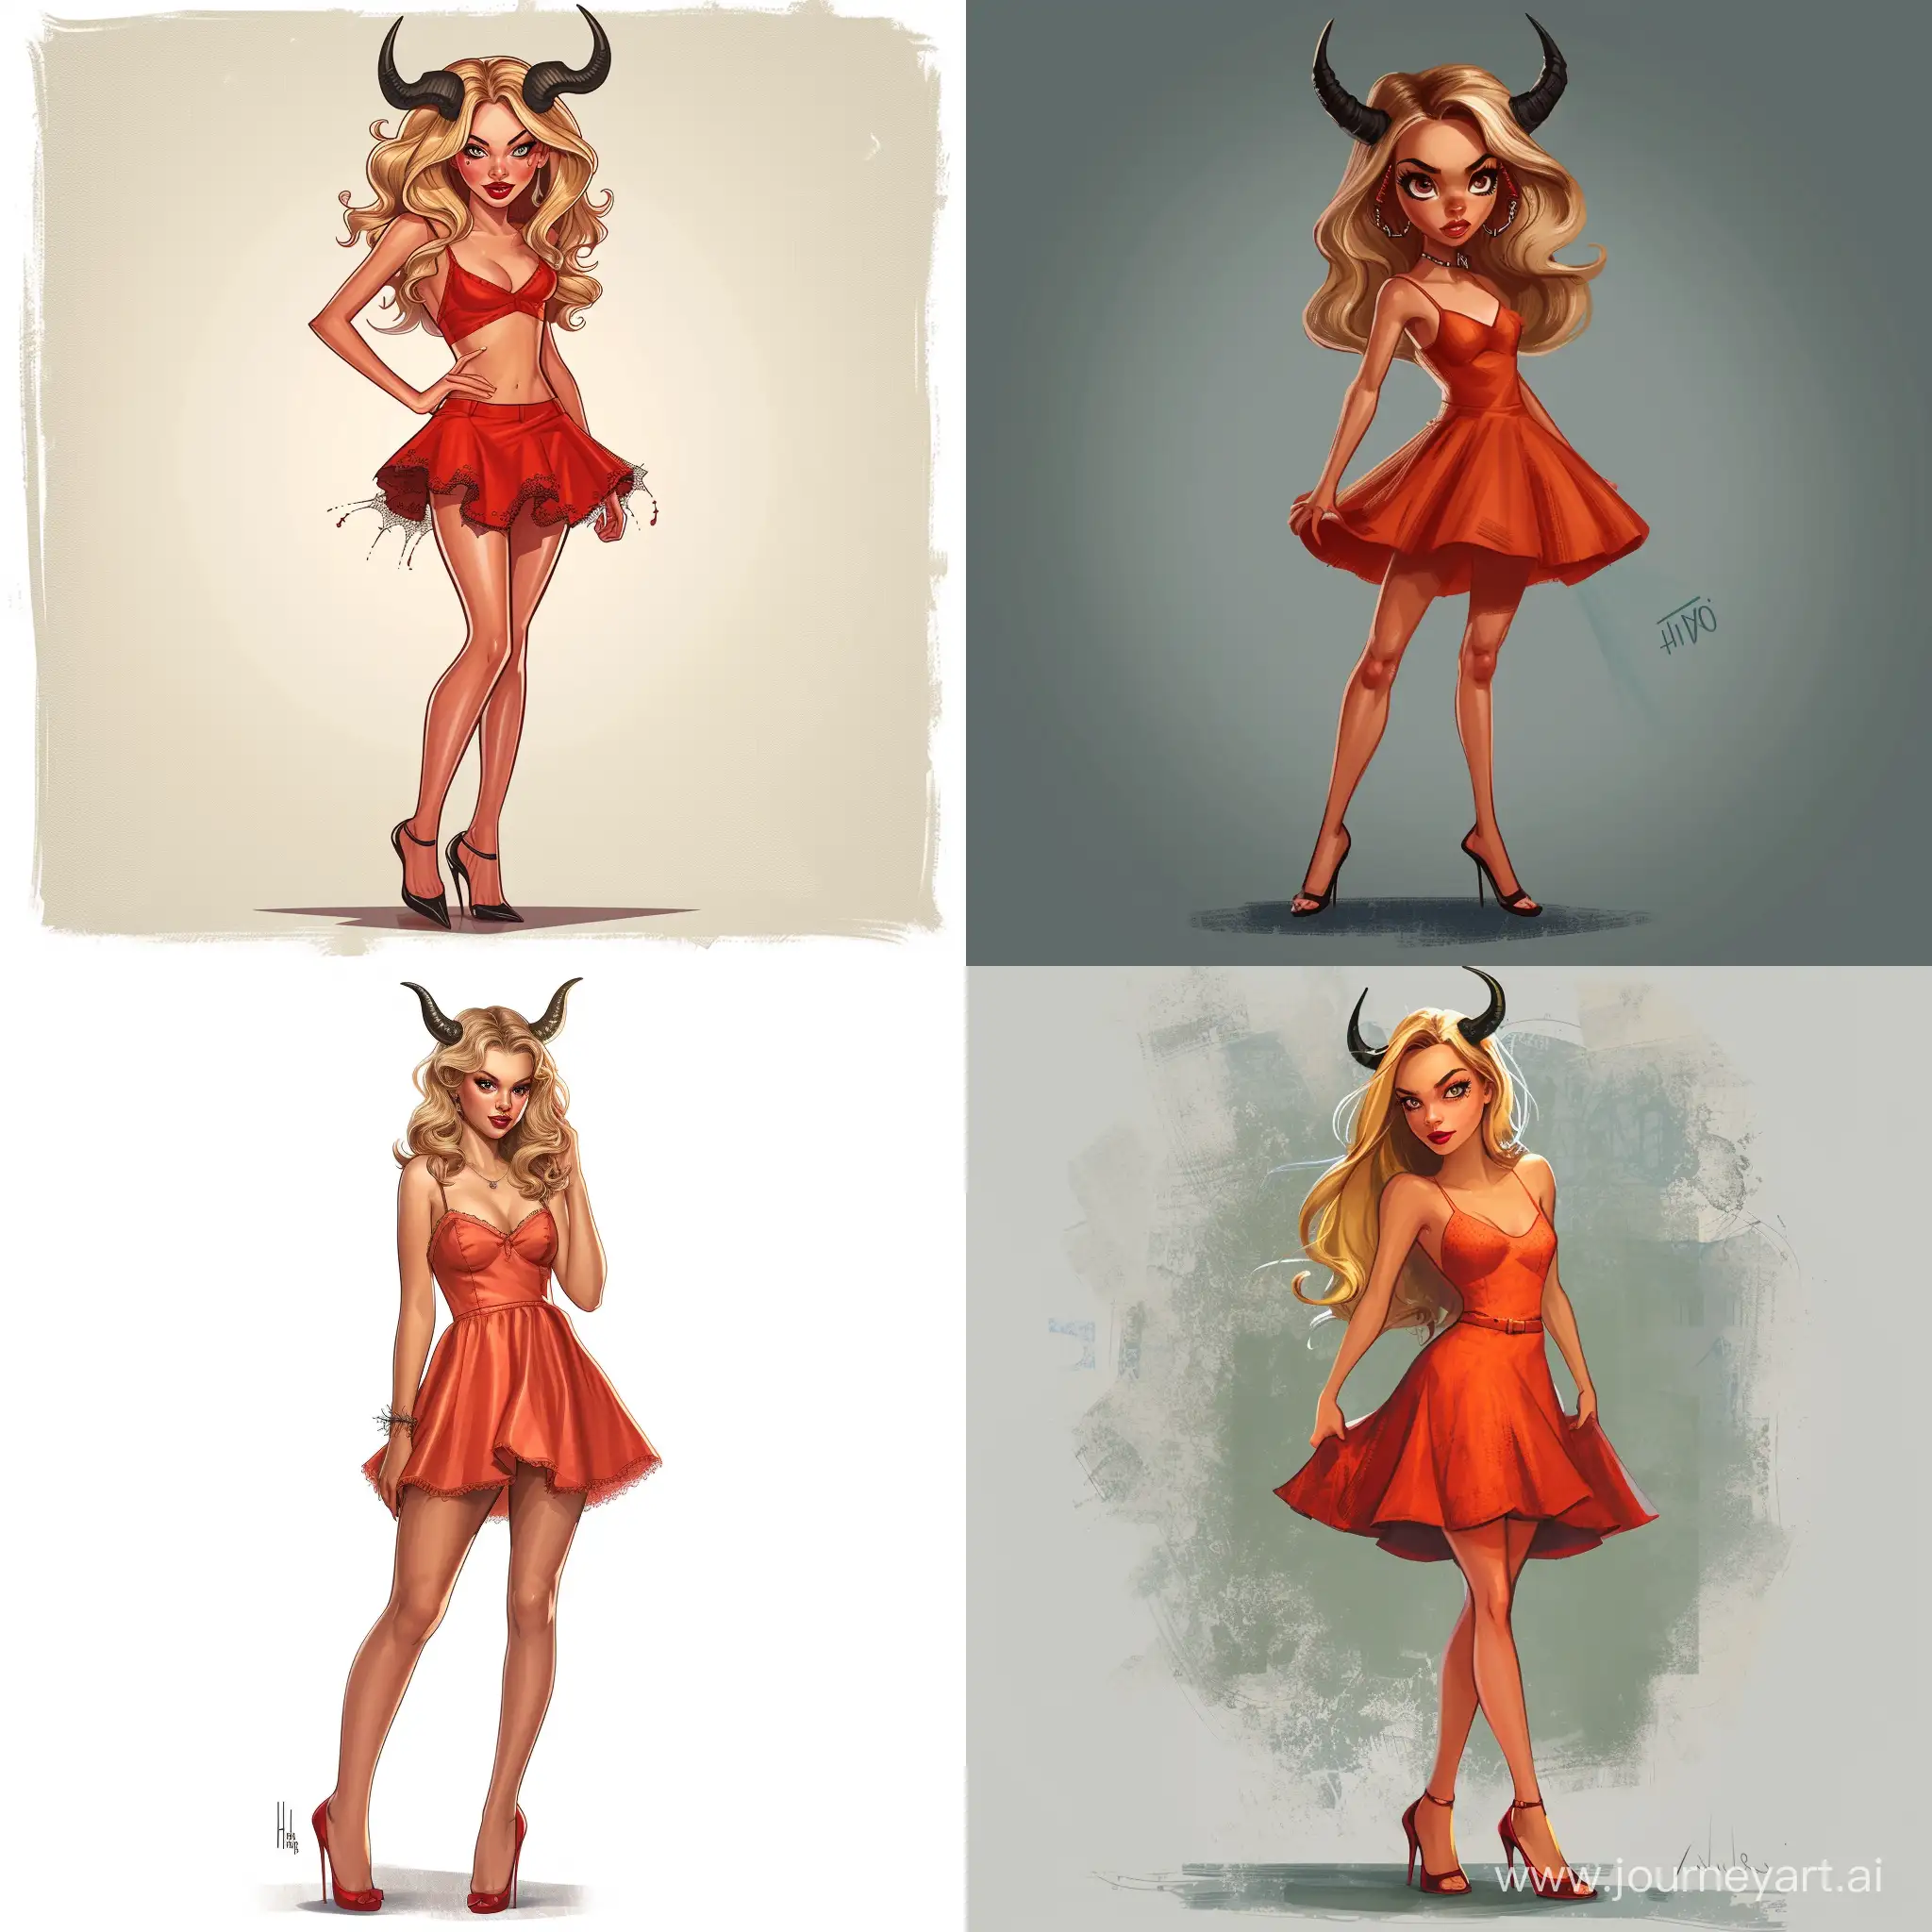 Bella-from-H2O-Wearing-Stylish-Halloween-Costumes-with-Demonic-Horns